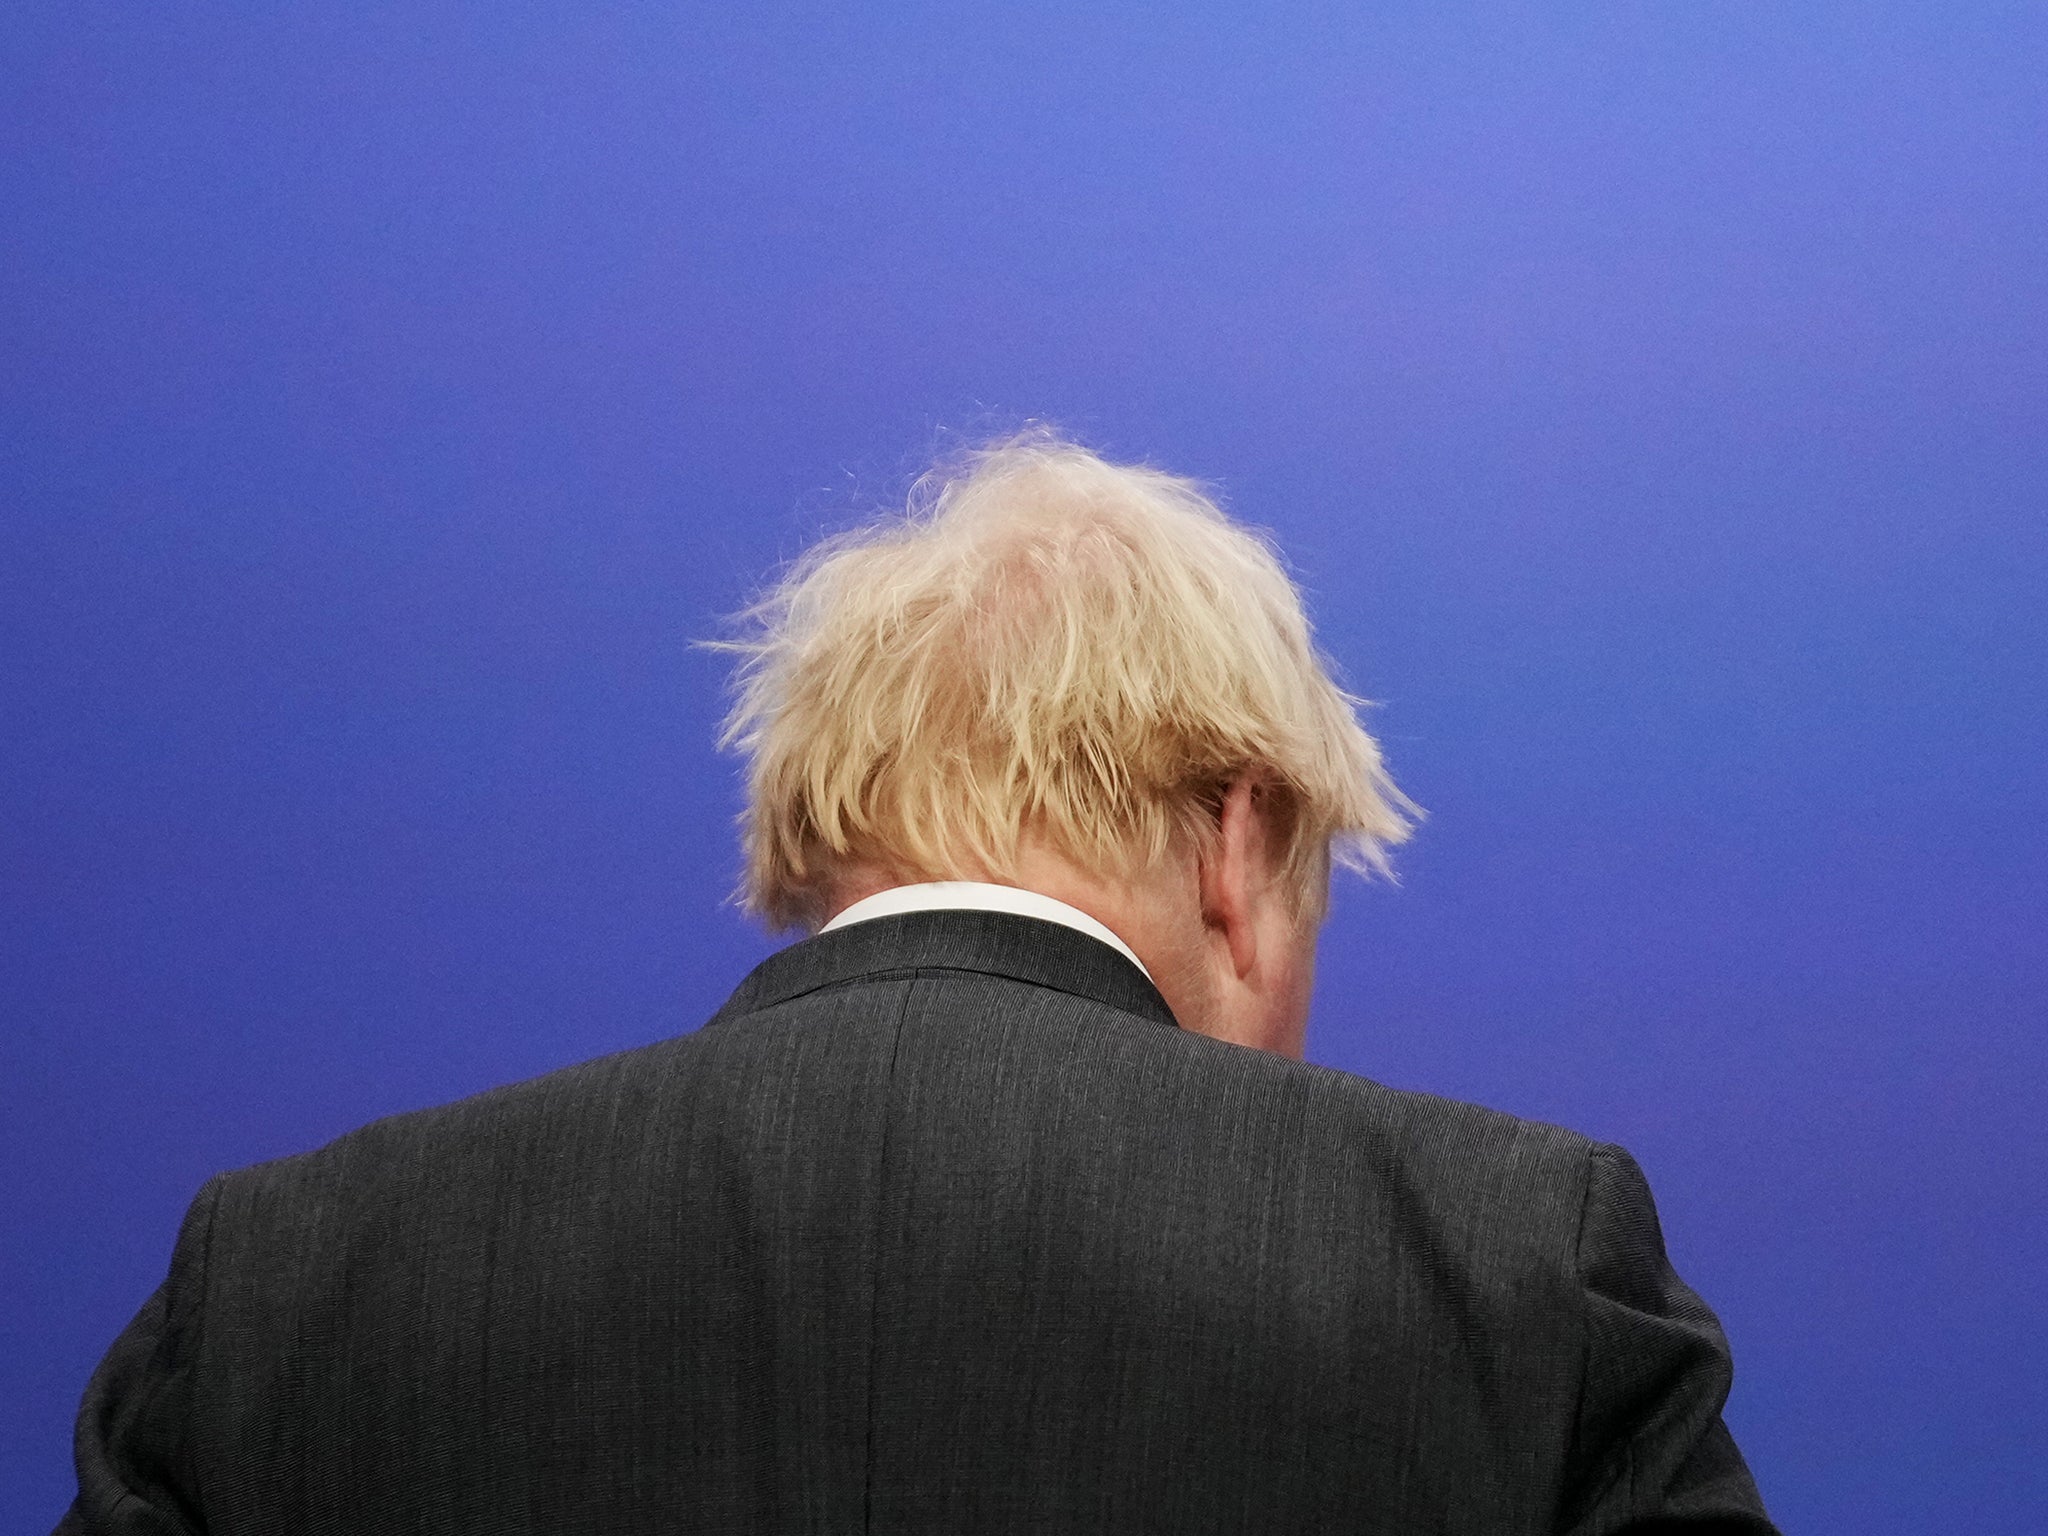 Boris Johnson’s apparent belief that rules apply only to other people is a recurring theme in his life